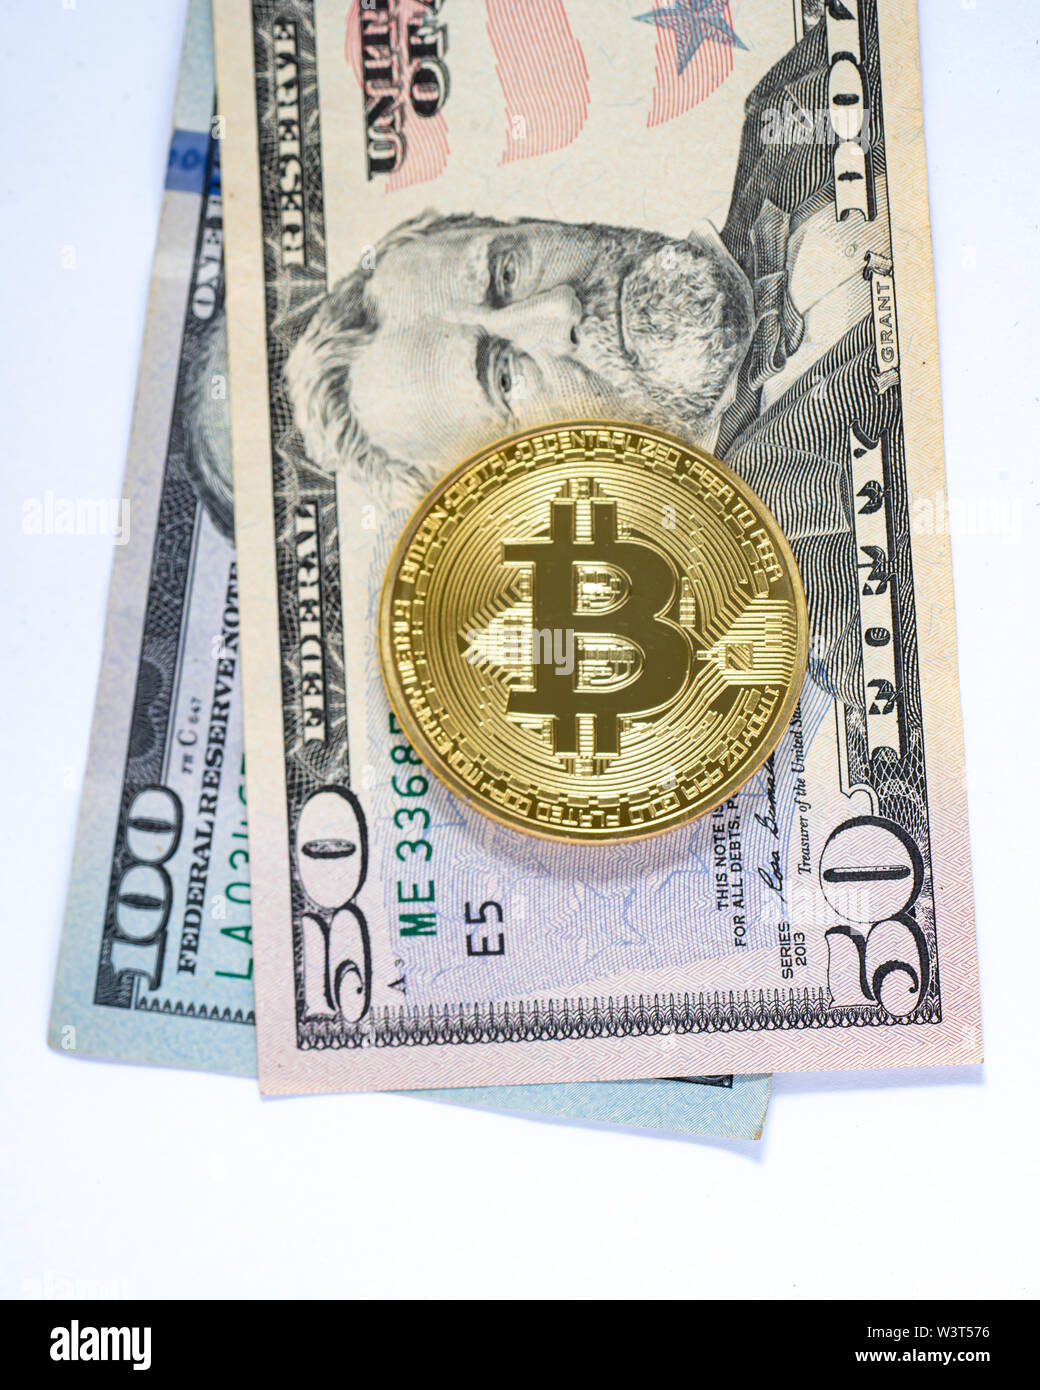 A gold colored bitcoin on $50 and $100 US currency bills isolated. Stock Photo